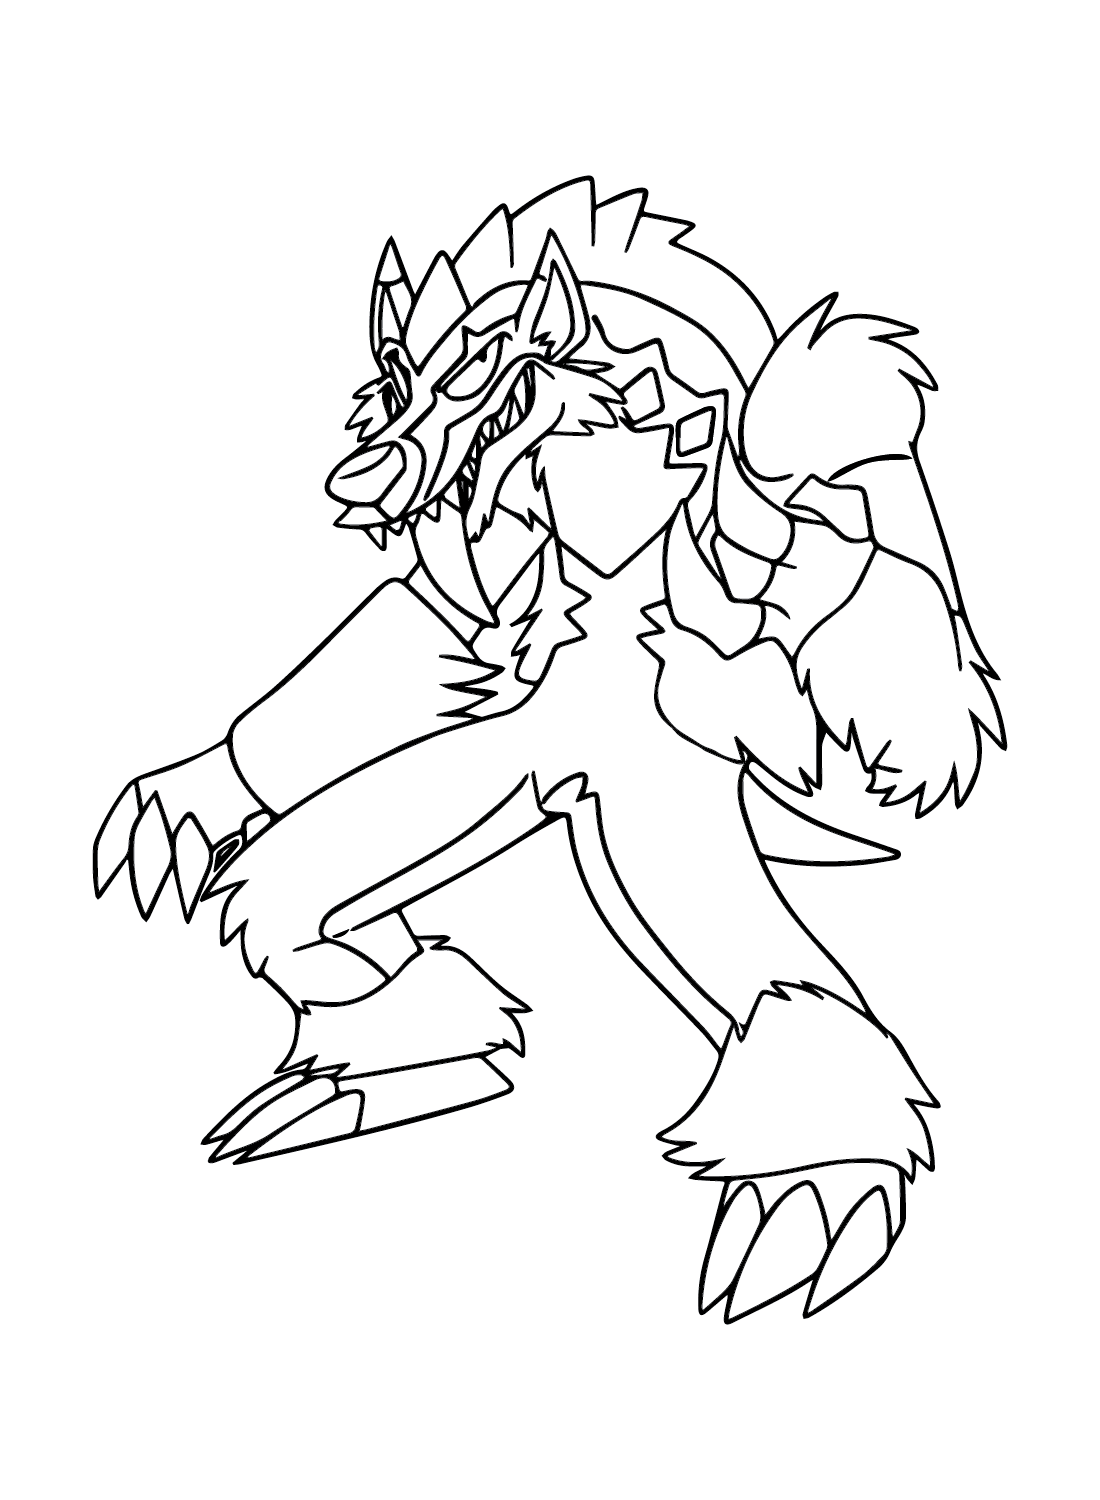 Obstagoon Character Coloring Page